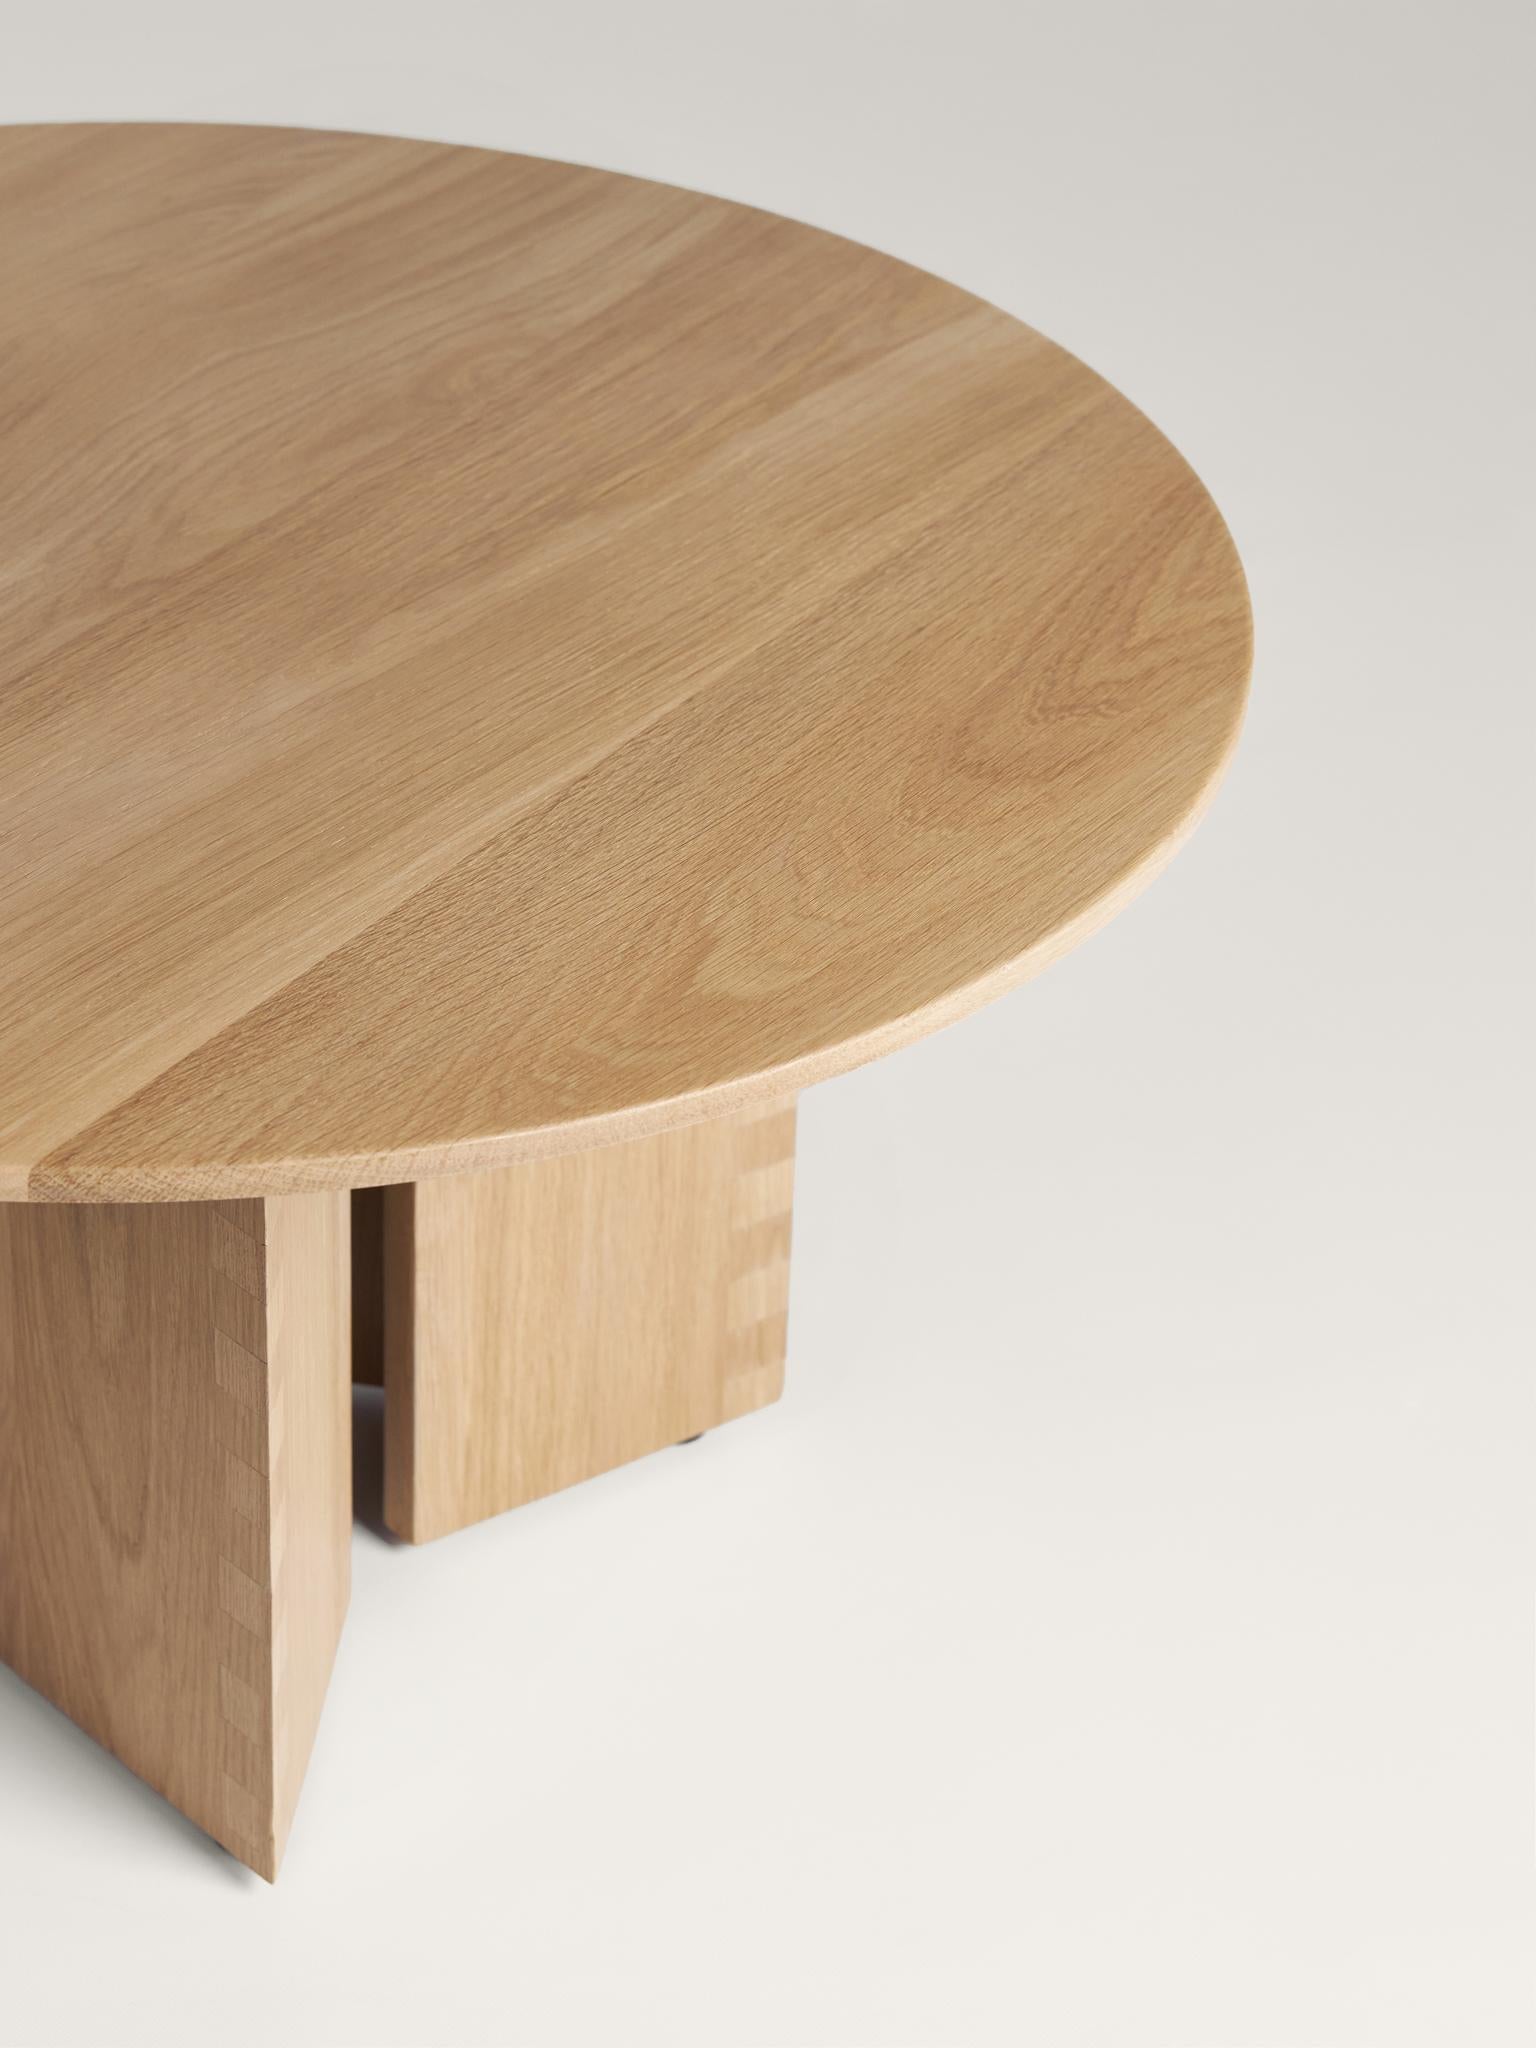 Oak Angus Coffee Table by Arbore x Studio PHAT For Sale